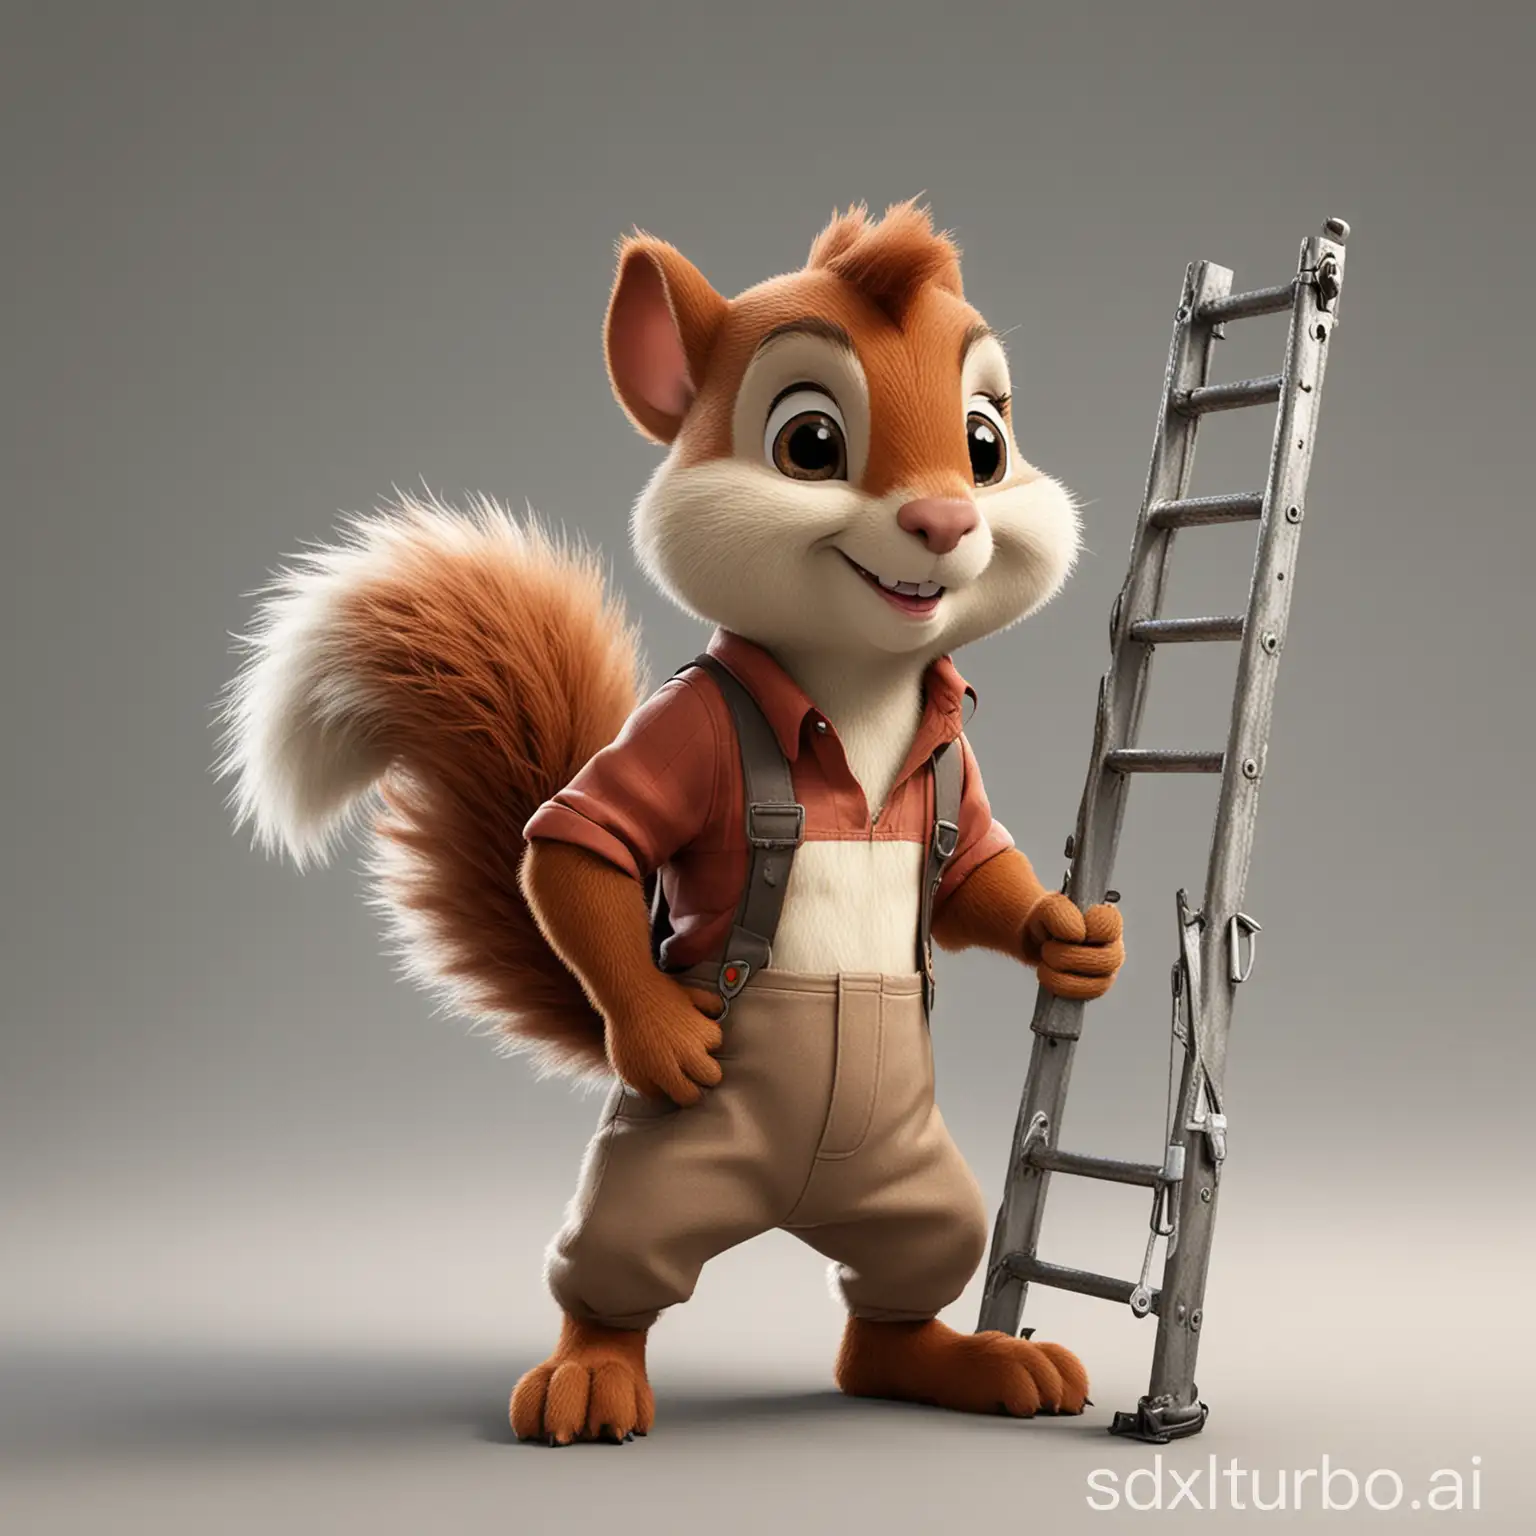 Construction-Squirrel-Mascot-with-Tools-and-Scaffoldings